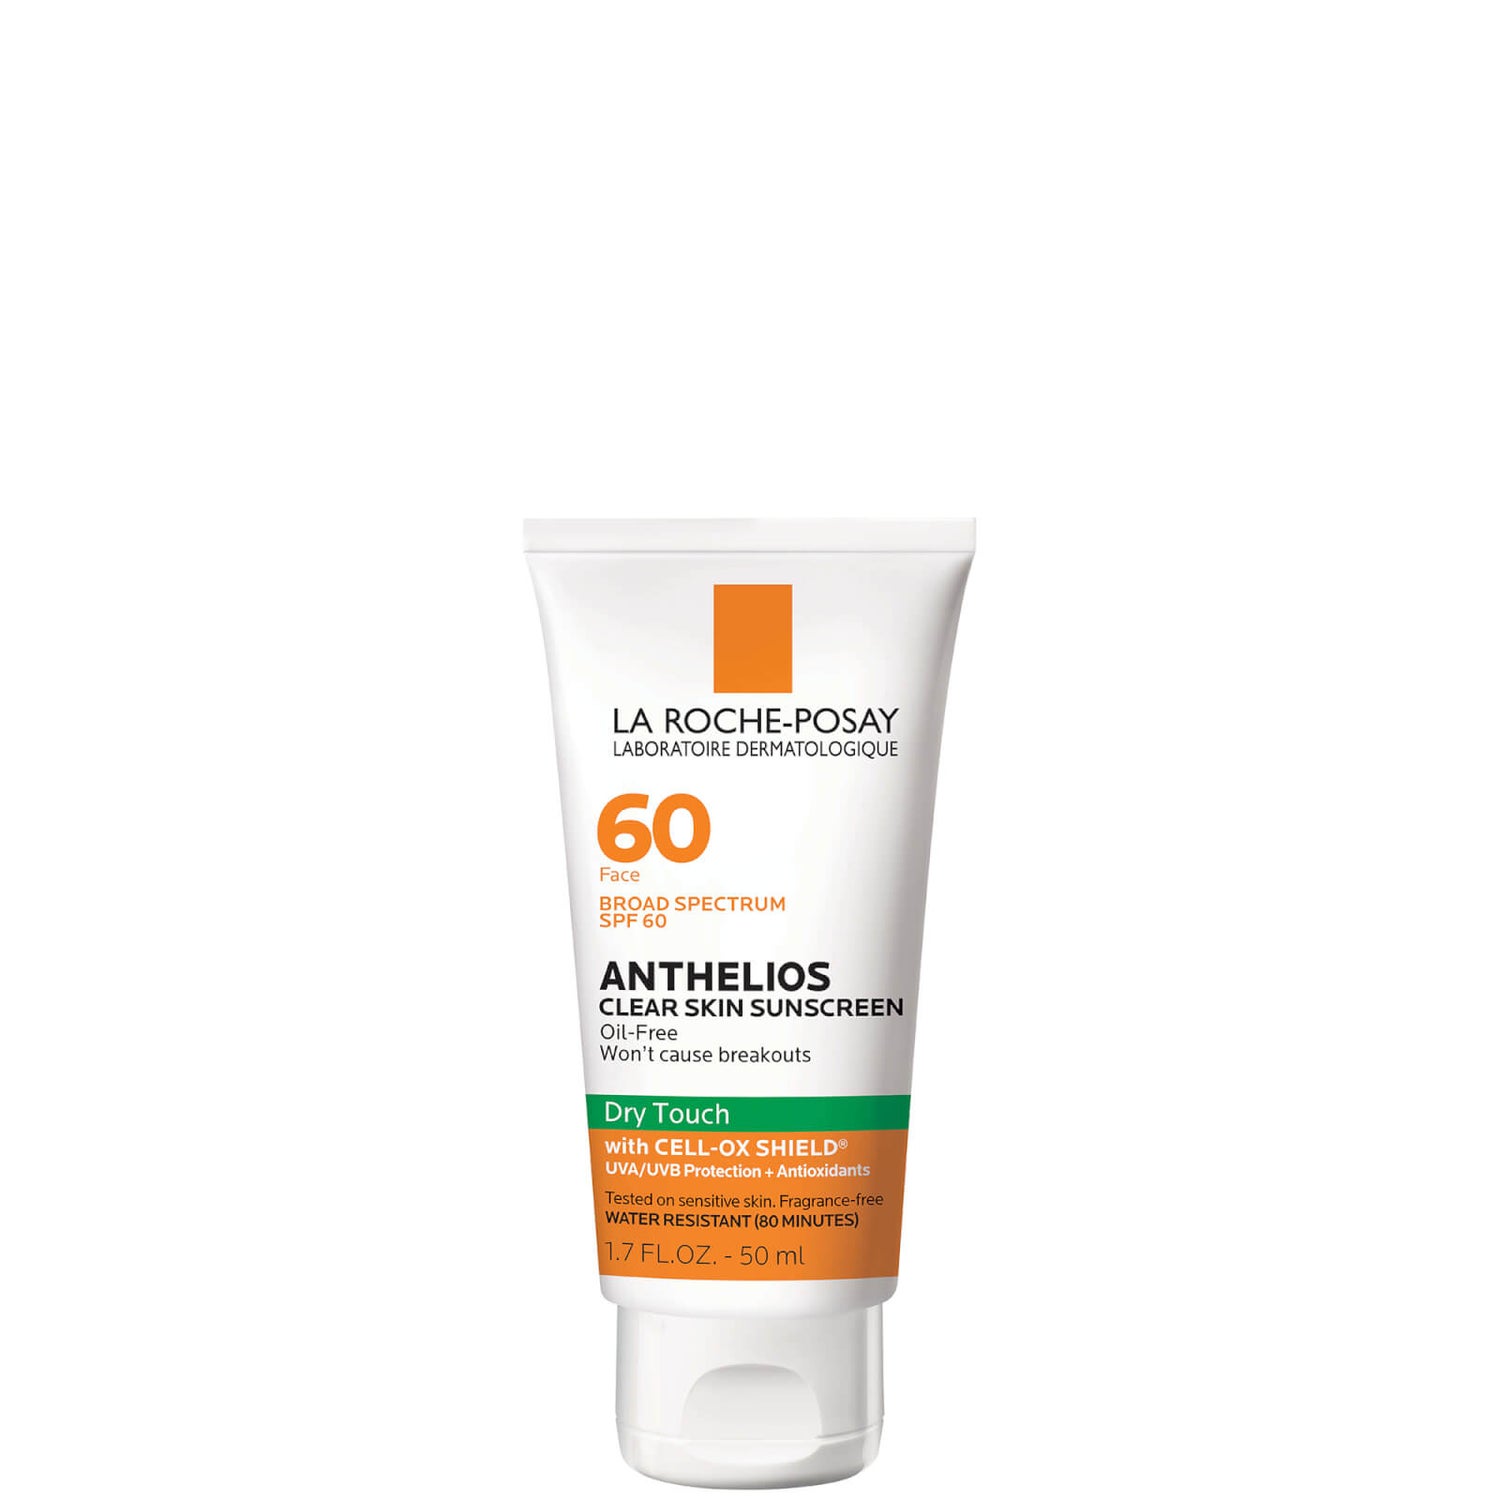 La Roche-Posay Anthelios Clear Skin Dry Touch Sunscreen SPF 60 (Various Sizes)